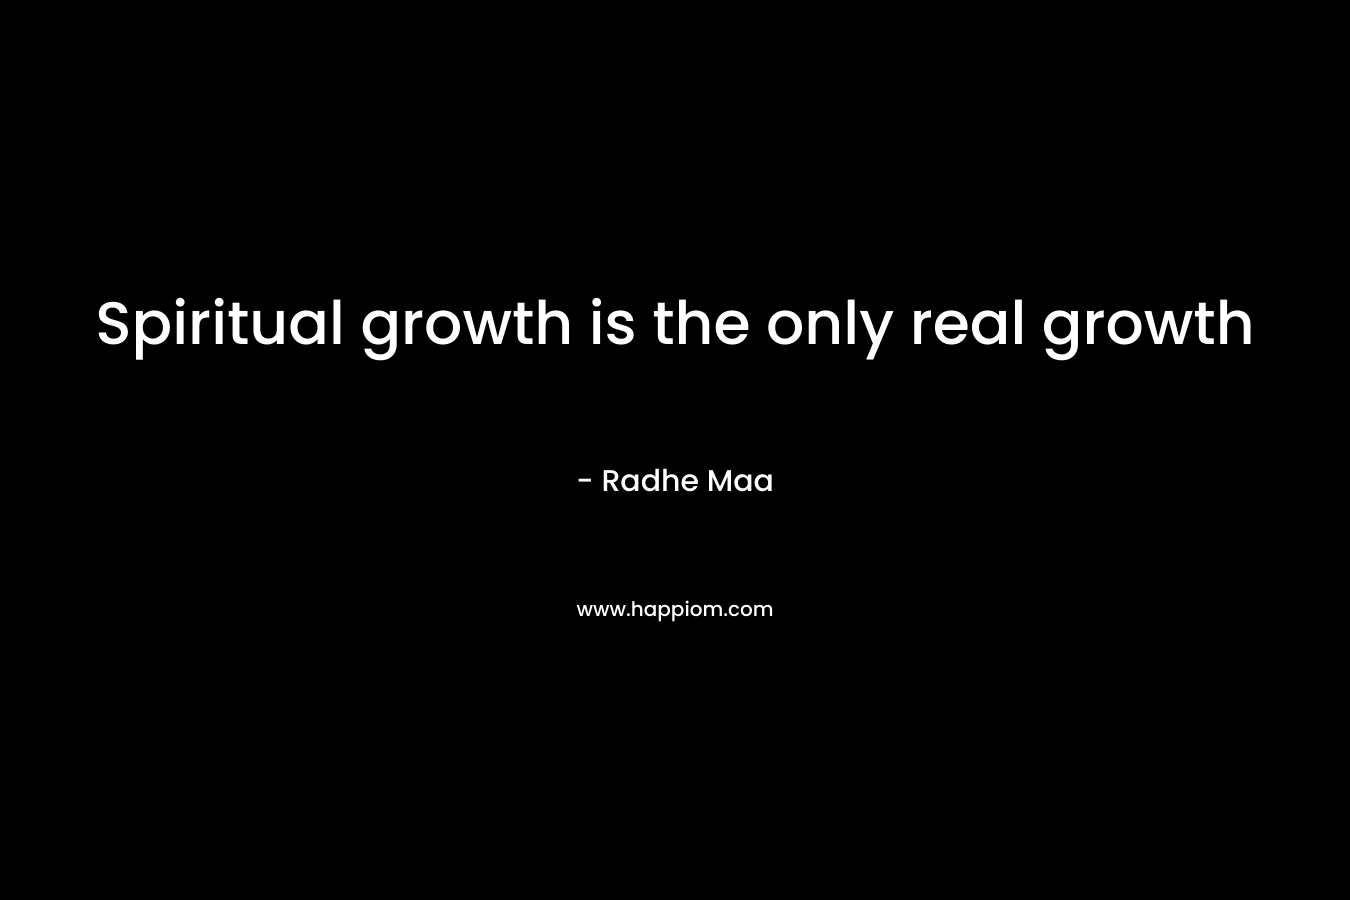 Spiritual growth is the only real growth